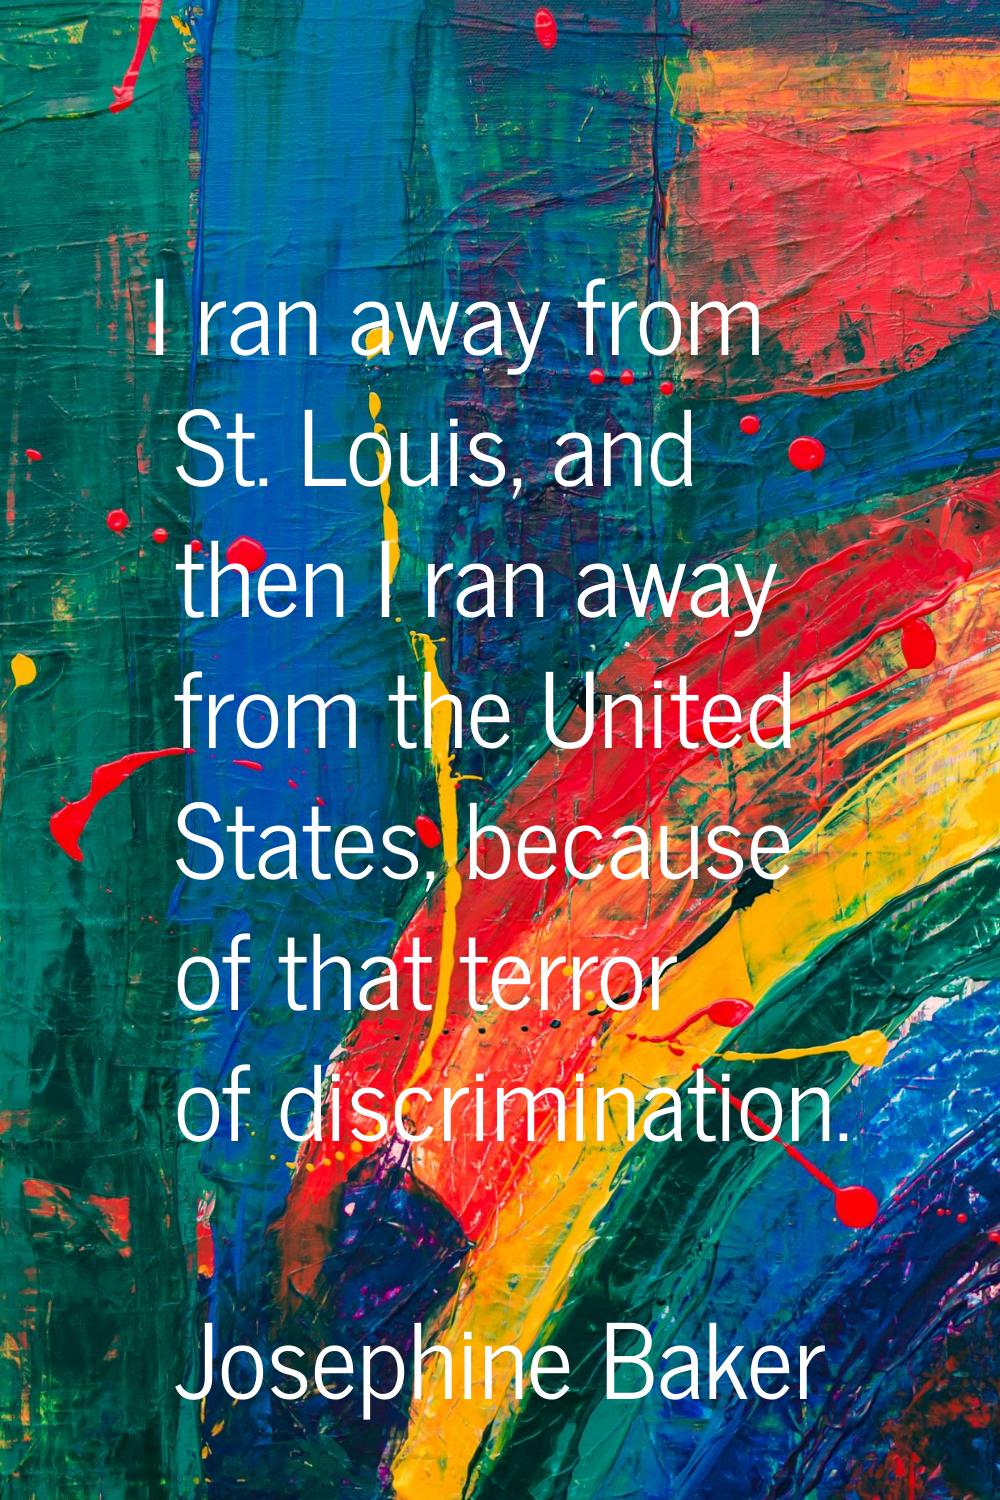 I ran away from St. Louis, and then I ran away from the United States, because of that terror of di